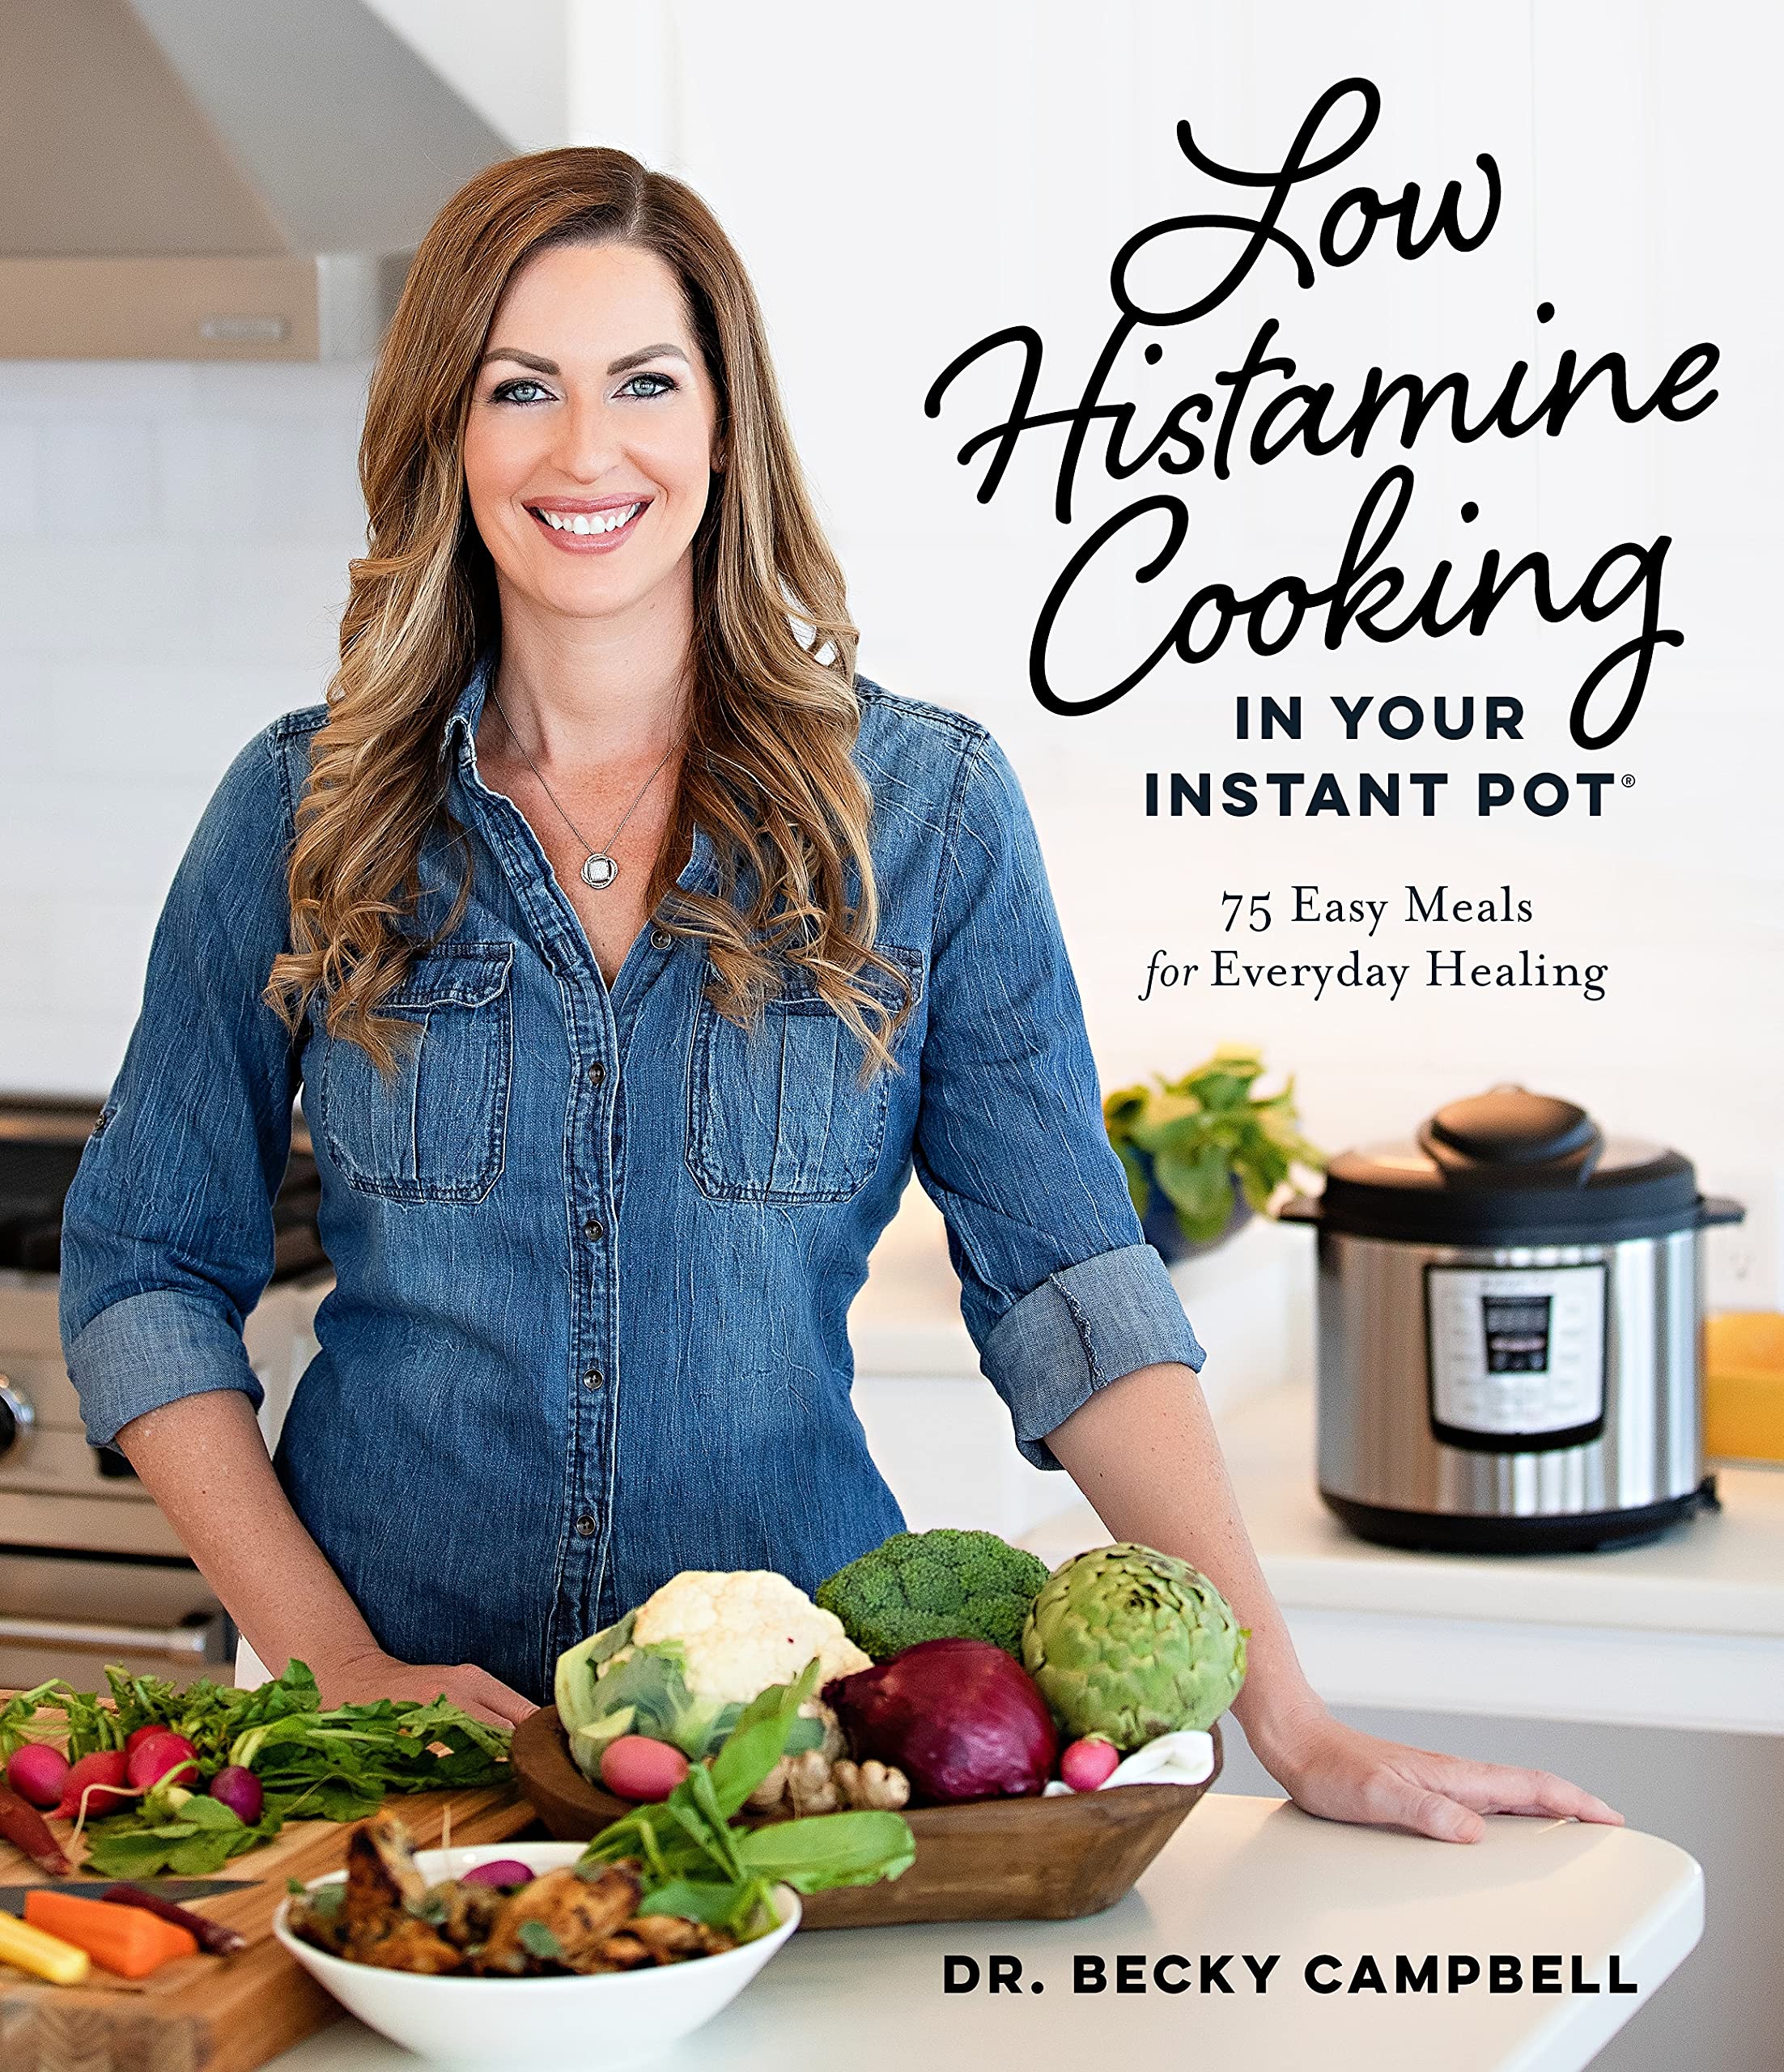 Low Histamine Cooking in Your Instant Pot: 75 Easy Meals for Everyday Healing - SureShot Books Publishing LLC